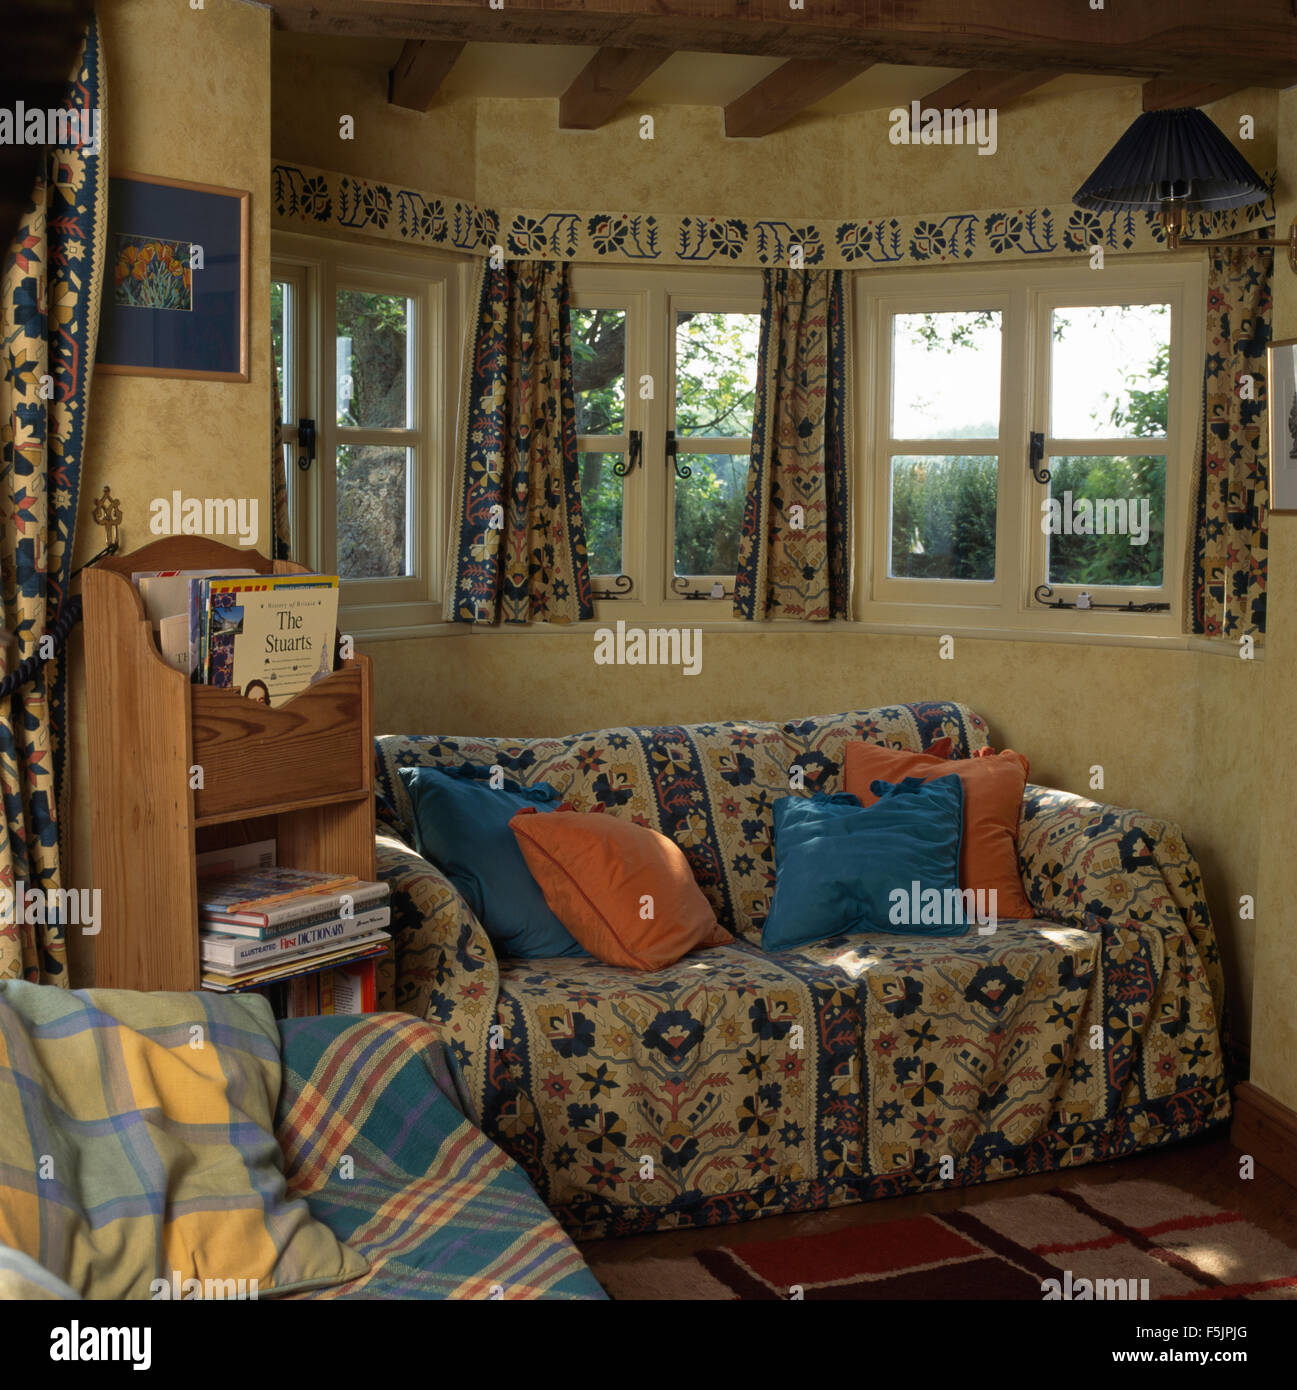 Floral patterned throw on sofa below windows in economy style cottage living room Stock Photo